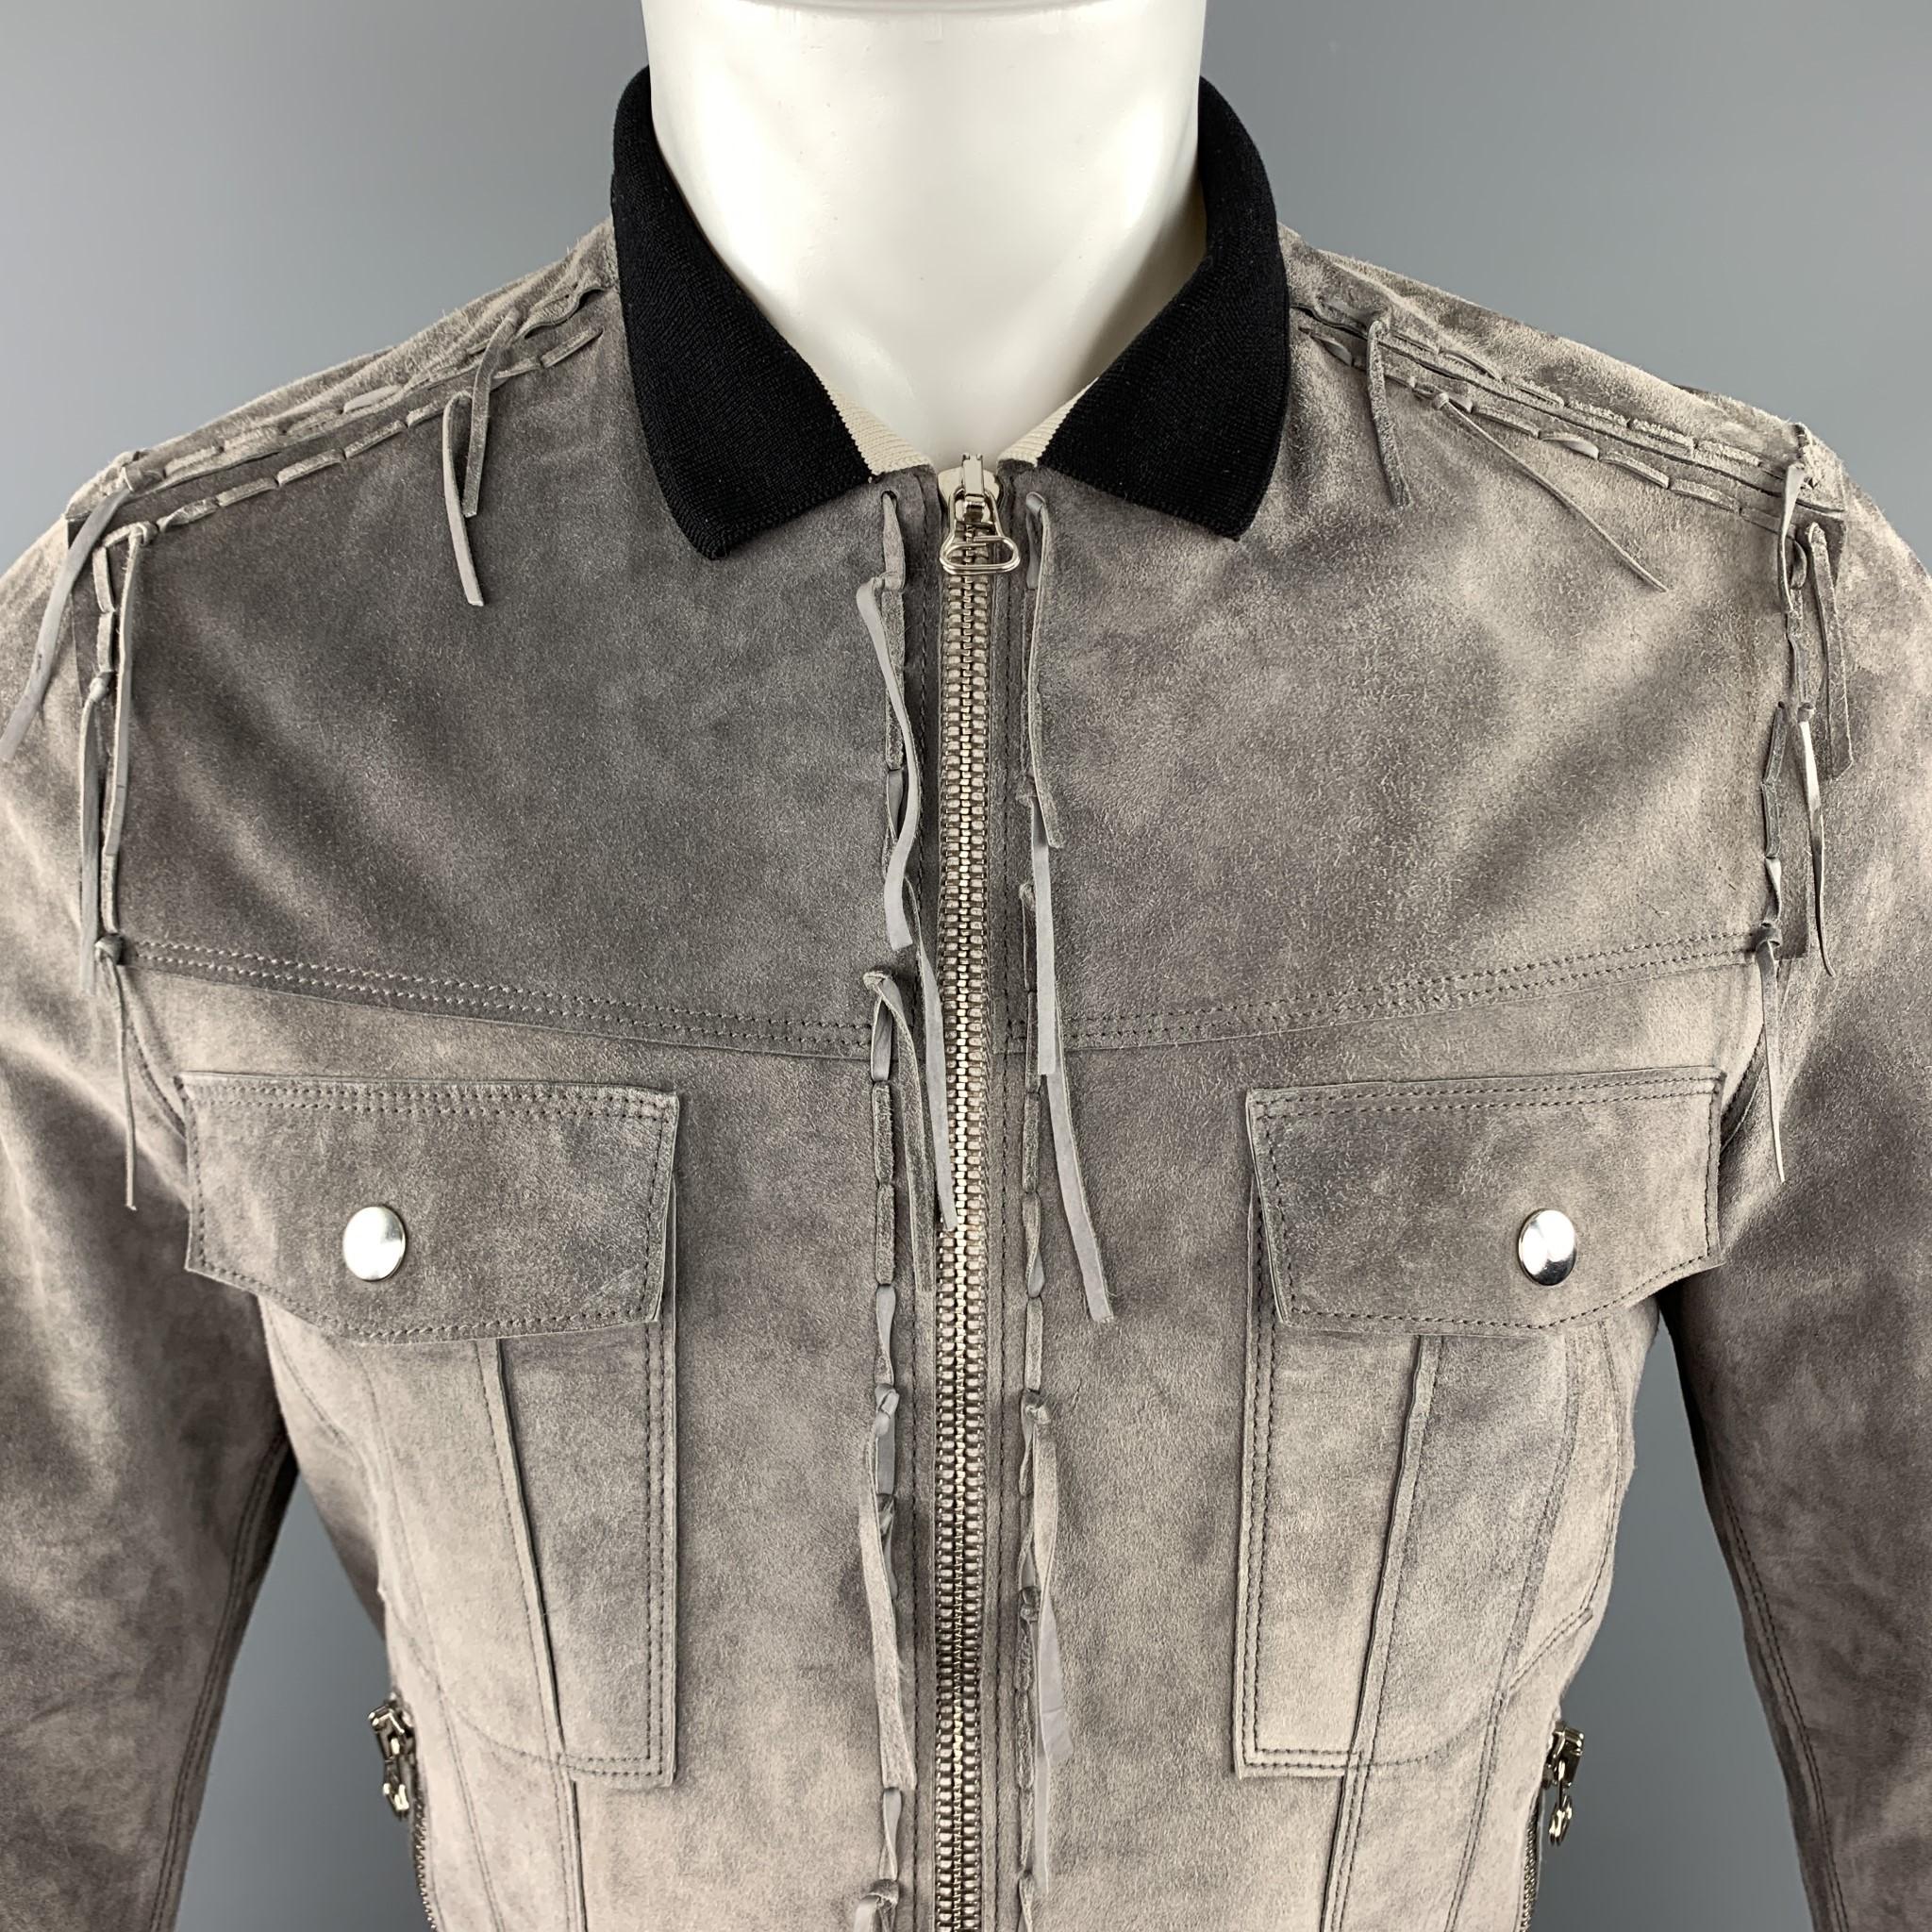 LANVIN jacket comes in gray suede with snap chest pockets, zip side pockets, black and beige striped knit collar, and fringe trim throughout. Made in Italy.

Excellent Pre-Owned Condition.
Marked: IT 48

Measurements:

Shoulder: 16 in.
Chest: 40